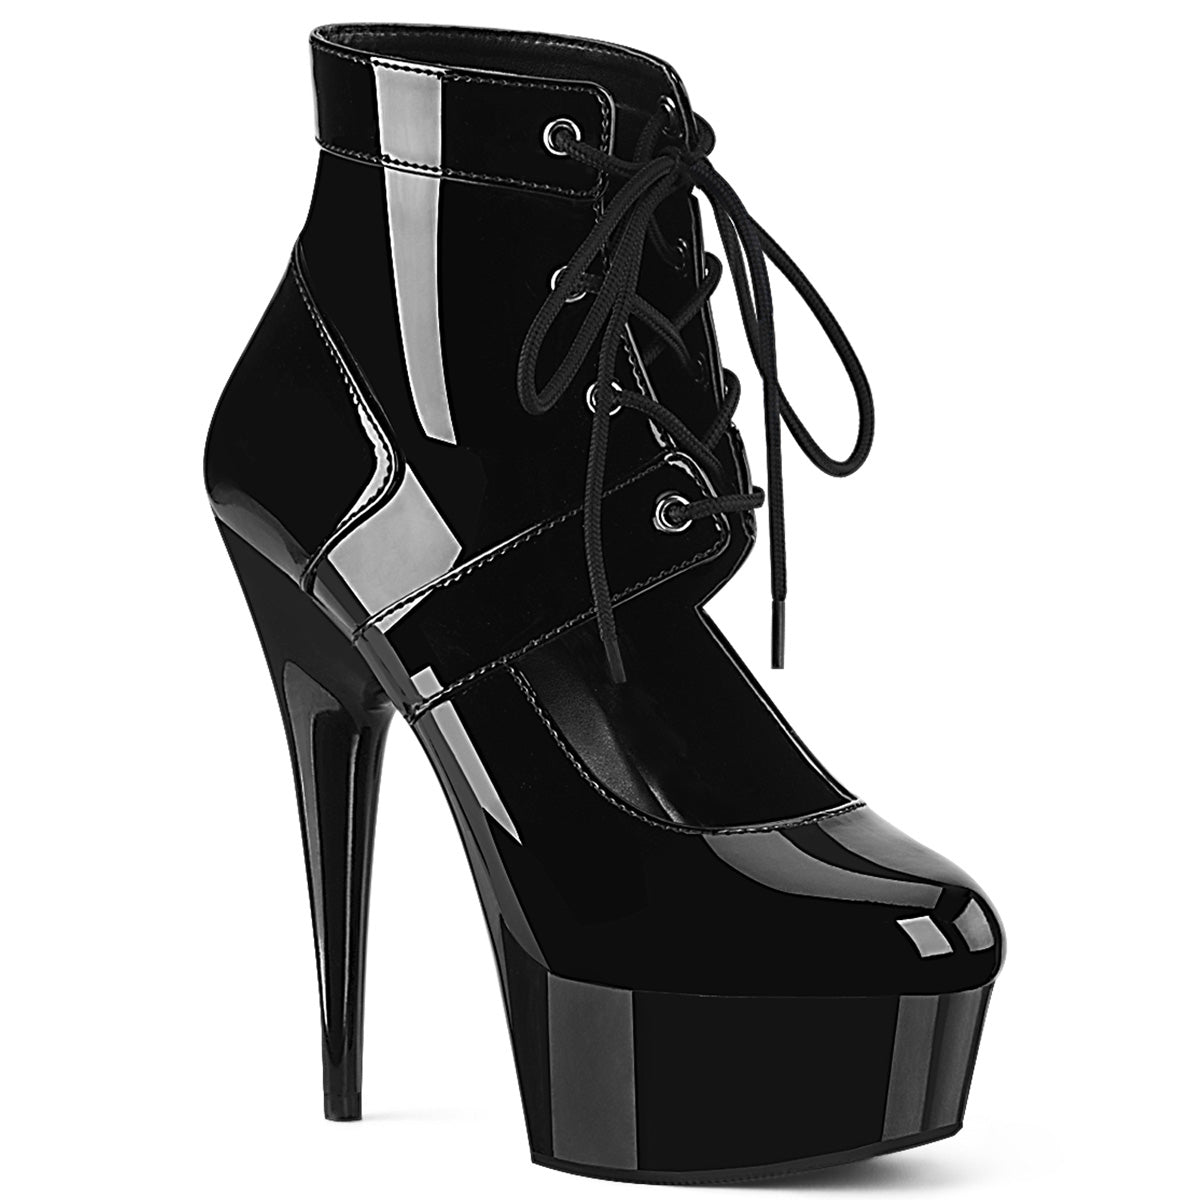 DELIGHT-688 Black Ankle Boots